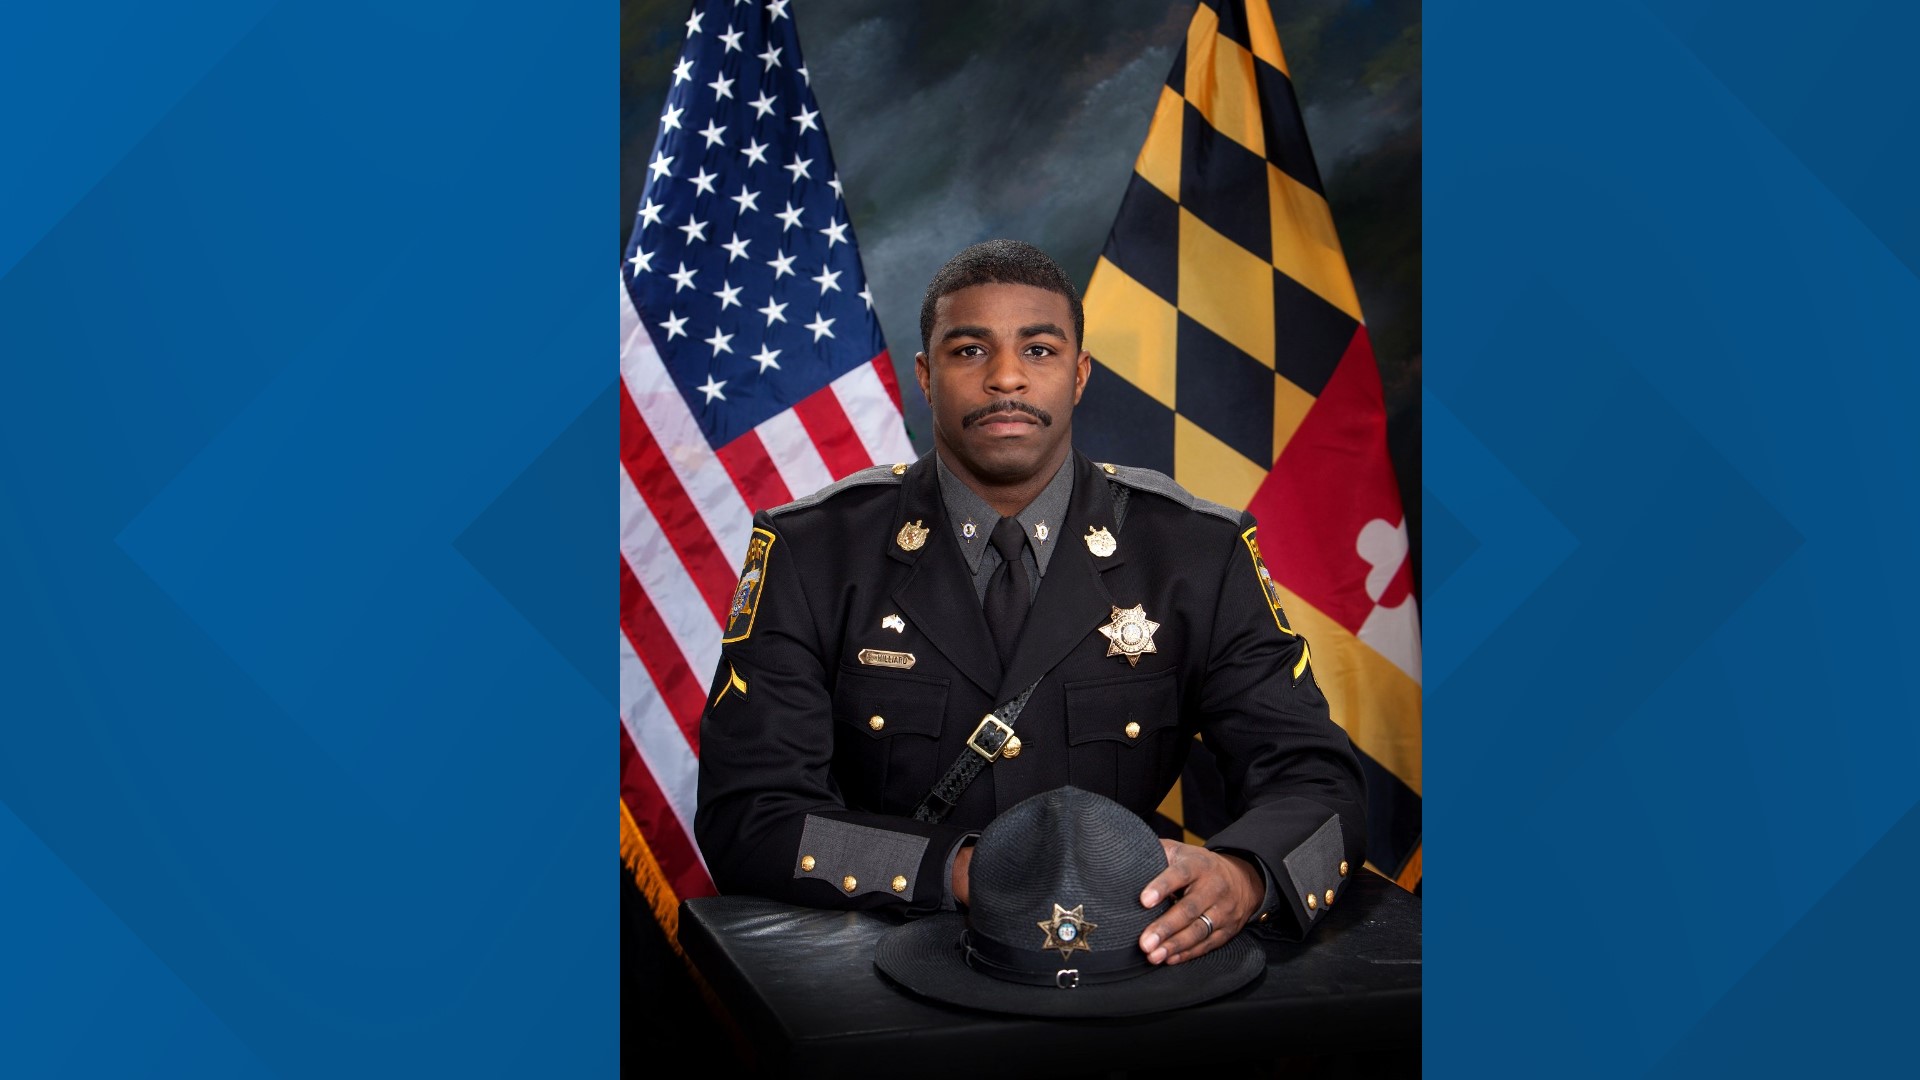 Deputy First Class Glenn Hilliard, a 16-year veteran law enforcement officer was gunned down in Pittsville while attempting to apprehend a fugitive.